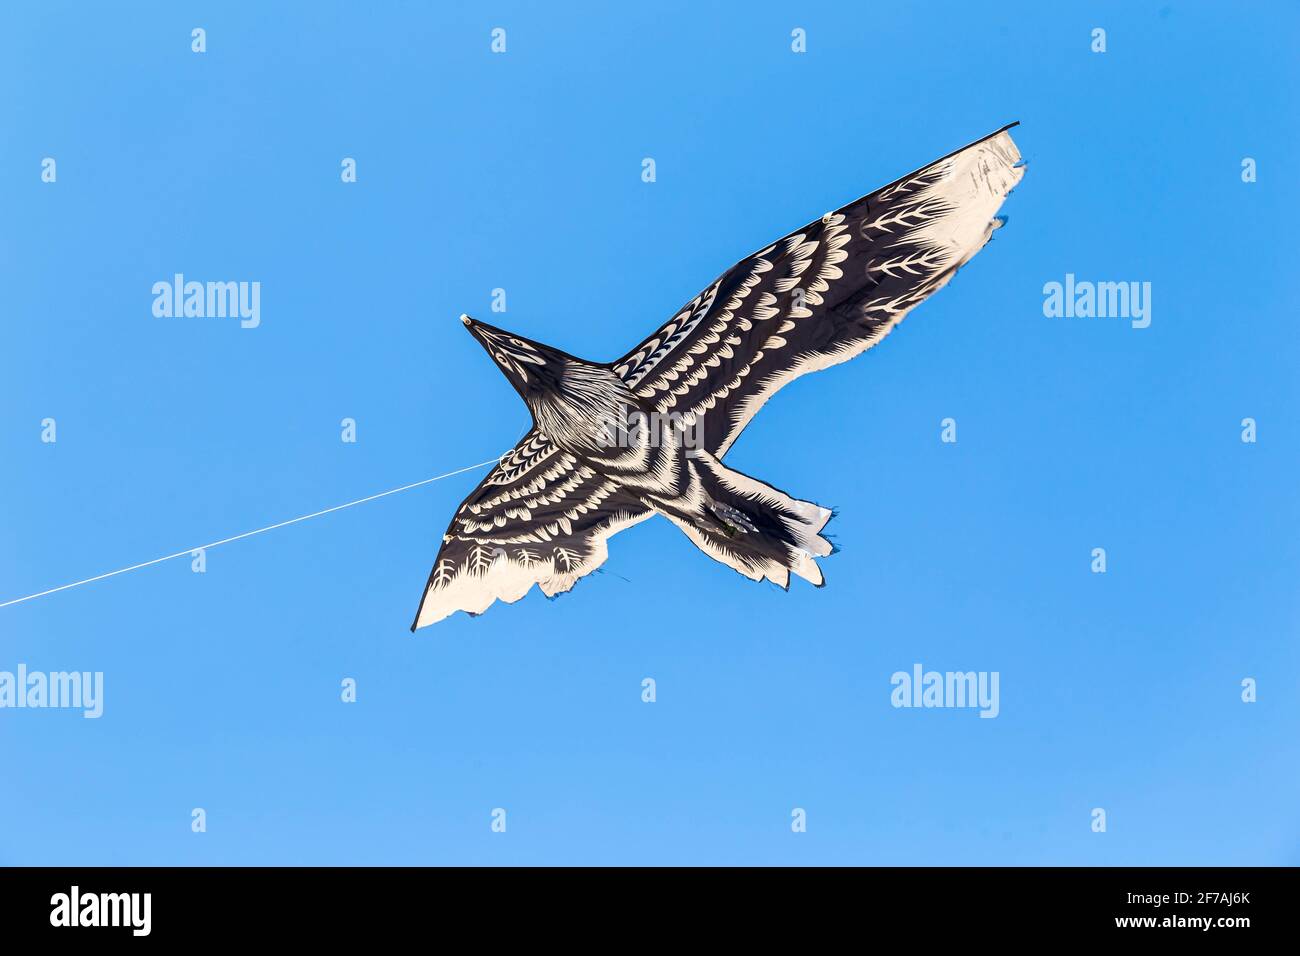 Colorful chinese kite flying in the blue sky. Stock Photo